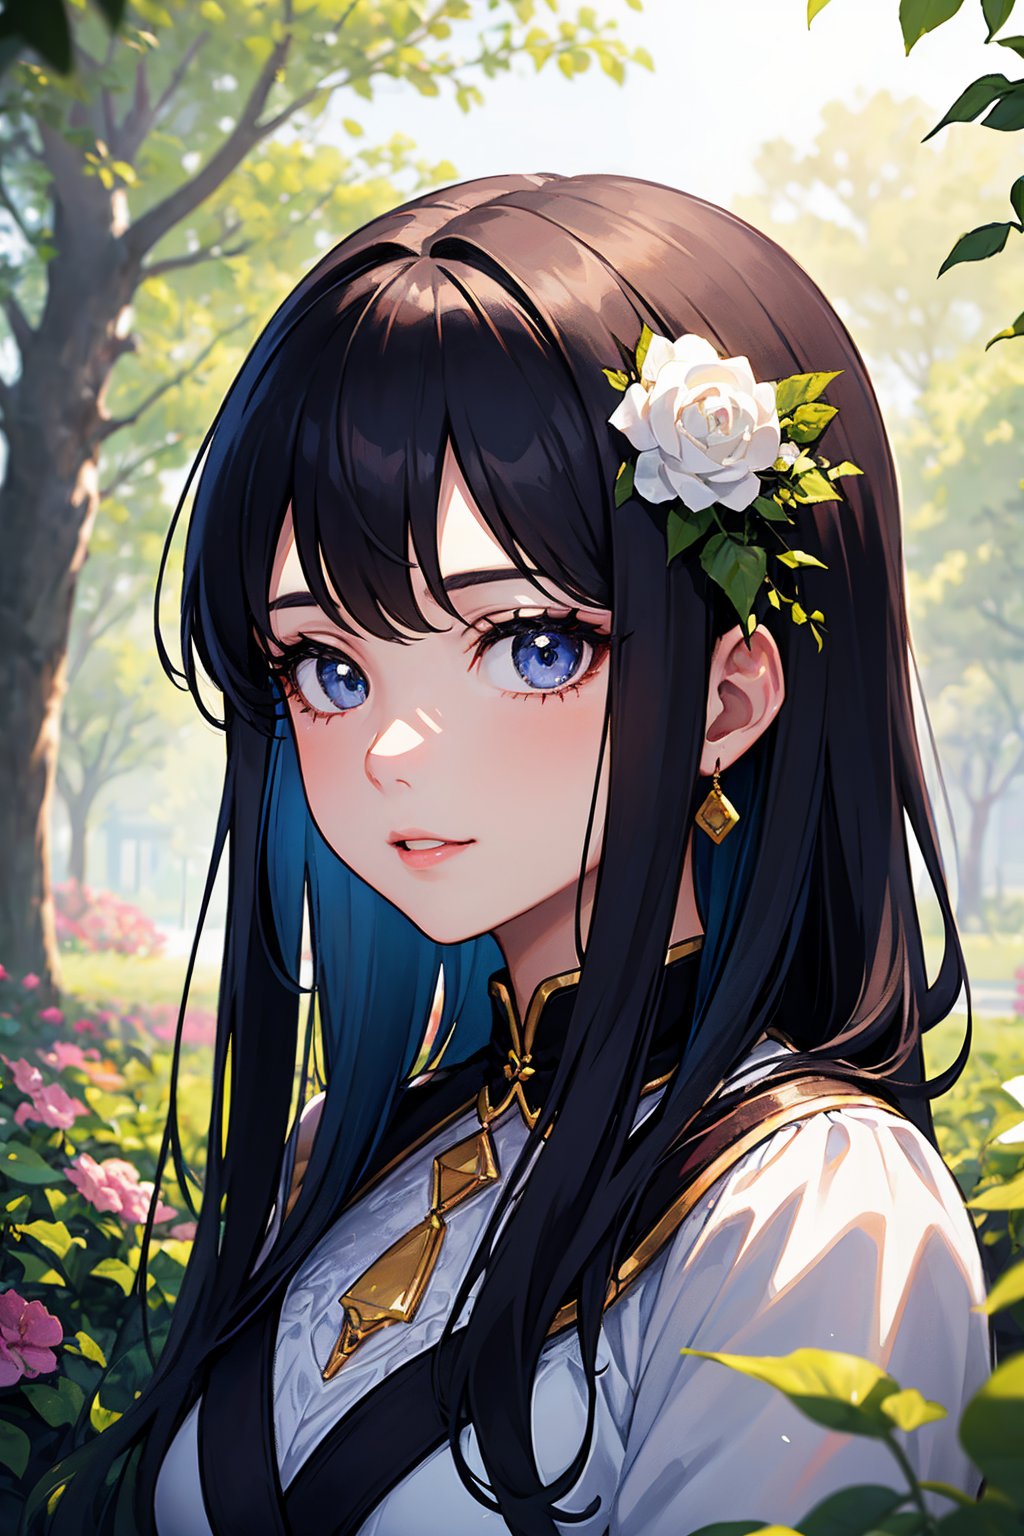 A cute, teen girl in an anime portrait with vibrant colors and sharp focus. The artwork should be of the best quality with ultra-detailed features. Her eyes should be beautifully detailed and her lips should be plump and well-defined. The girl should have a playful and cheerful expression with rosy cheeks. Her long eyelashes should be prominent, adding to her innocence. She should have a flawless complexion and her hair should be styled in a trendy and modern way. The background should have a fantasy-like setting, with colorful flowers and lush greenery in a garden. The lighting should be soft and warm, creating a dreamy atmosphere.